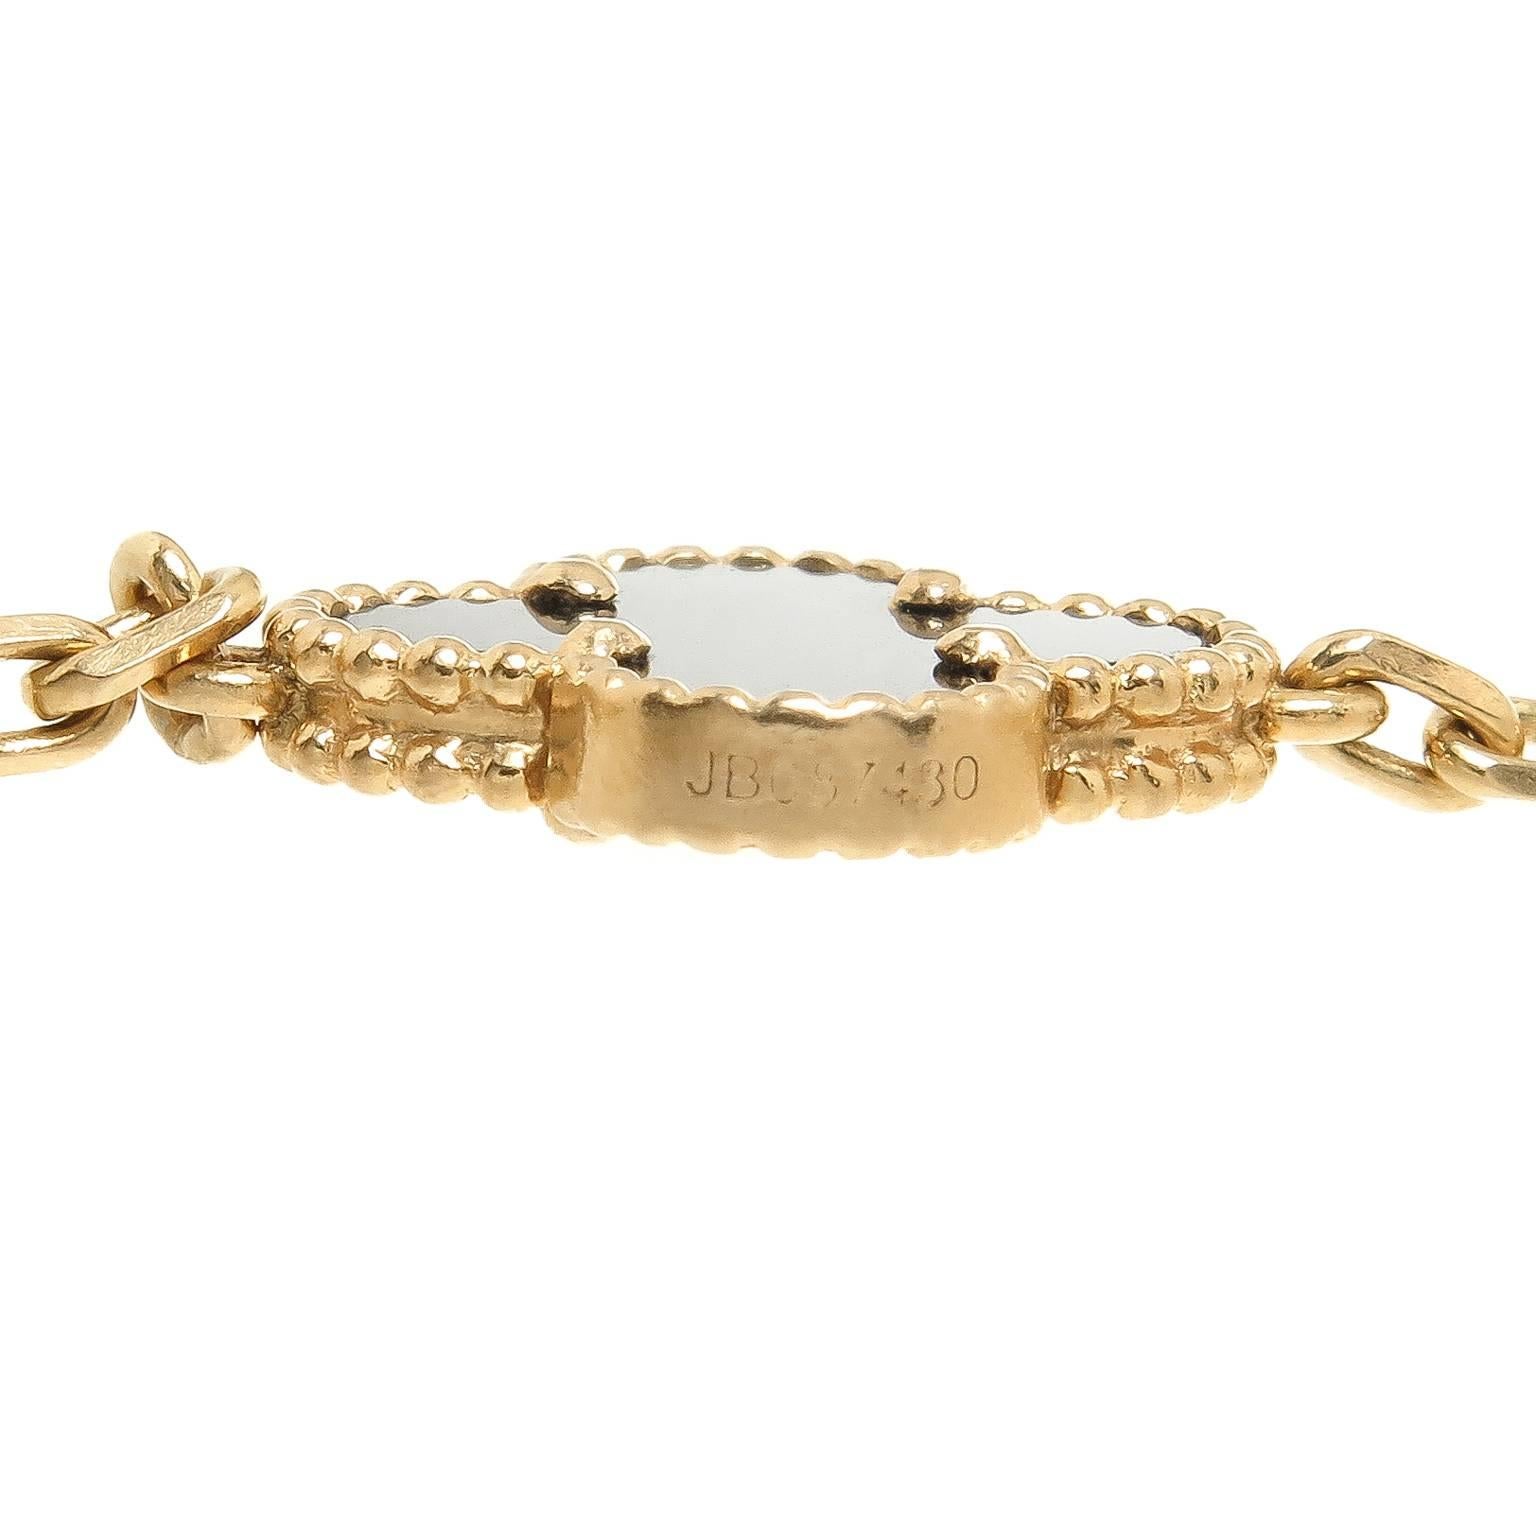 Circa 2012 Van Cleef and Arpels 18K yellow Gold 5 Station Onyx Alhambra vintage collection bracelet. measuring 7 1/2 inch in length. Comes in original VCA Suede Bracelet Pouch.